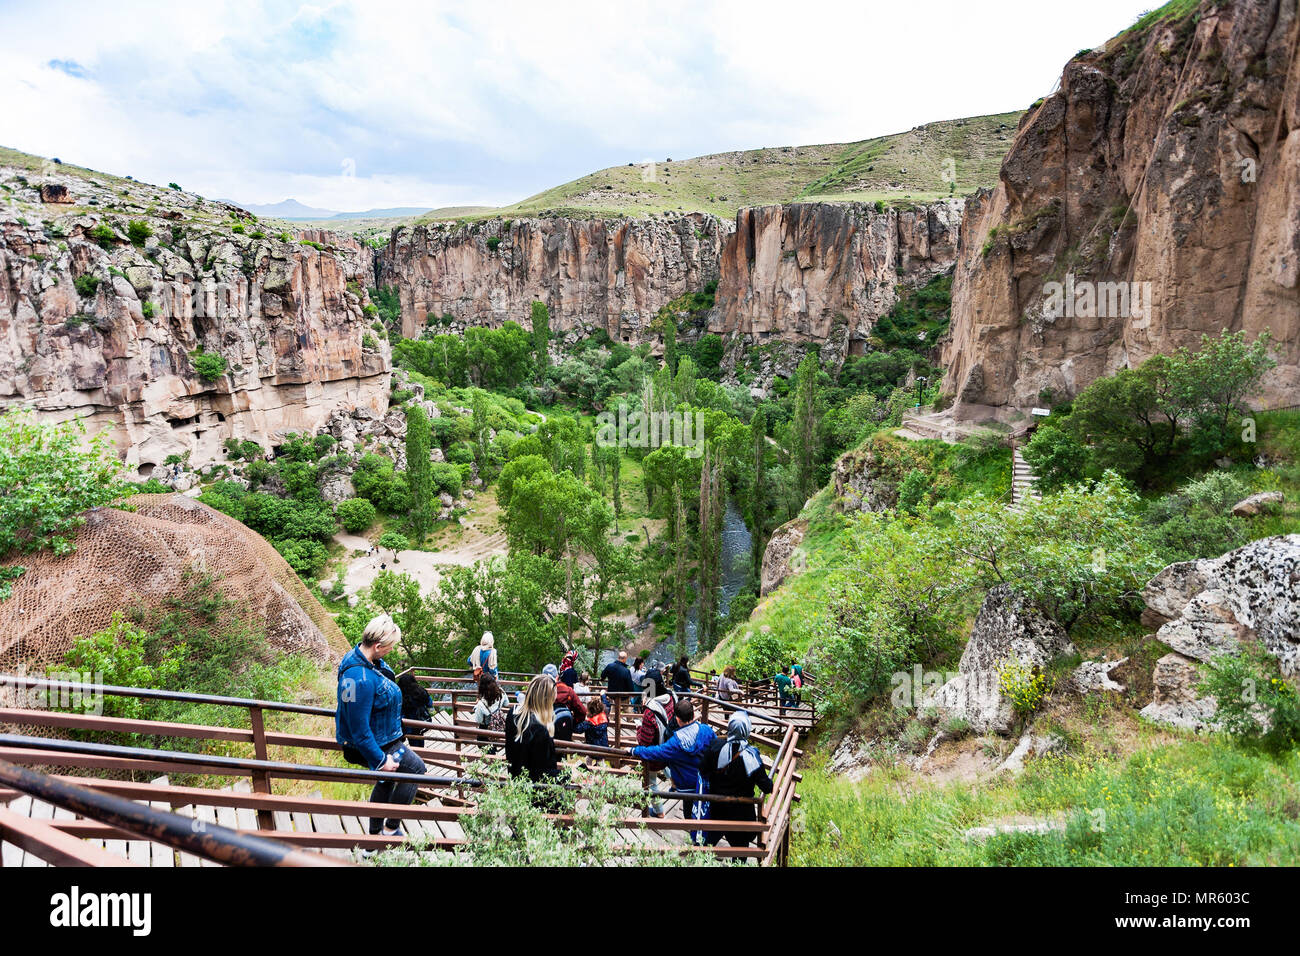 IHLARA VALLEY, TURKEY - MAY 6, 2018: people on stair to Ihlara Valley in Aksaray Province. Ihlara Valley is 16 km long gorge, it is the most famous va Stock Photo